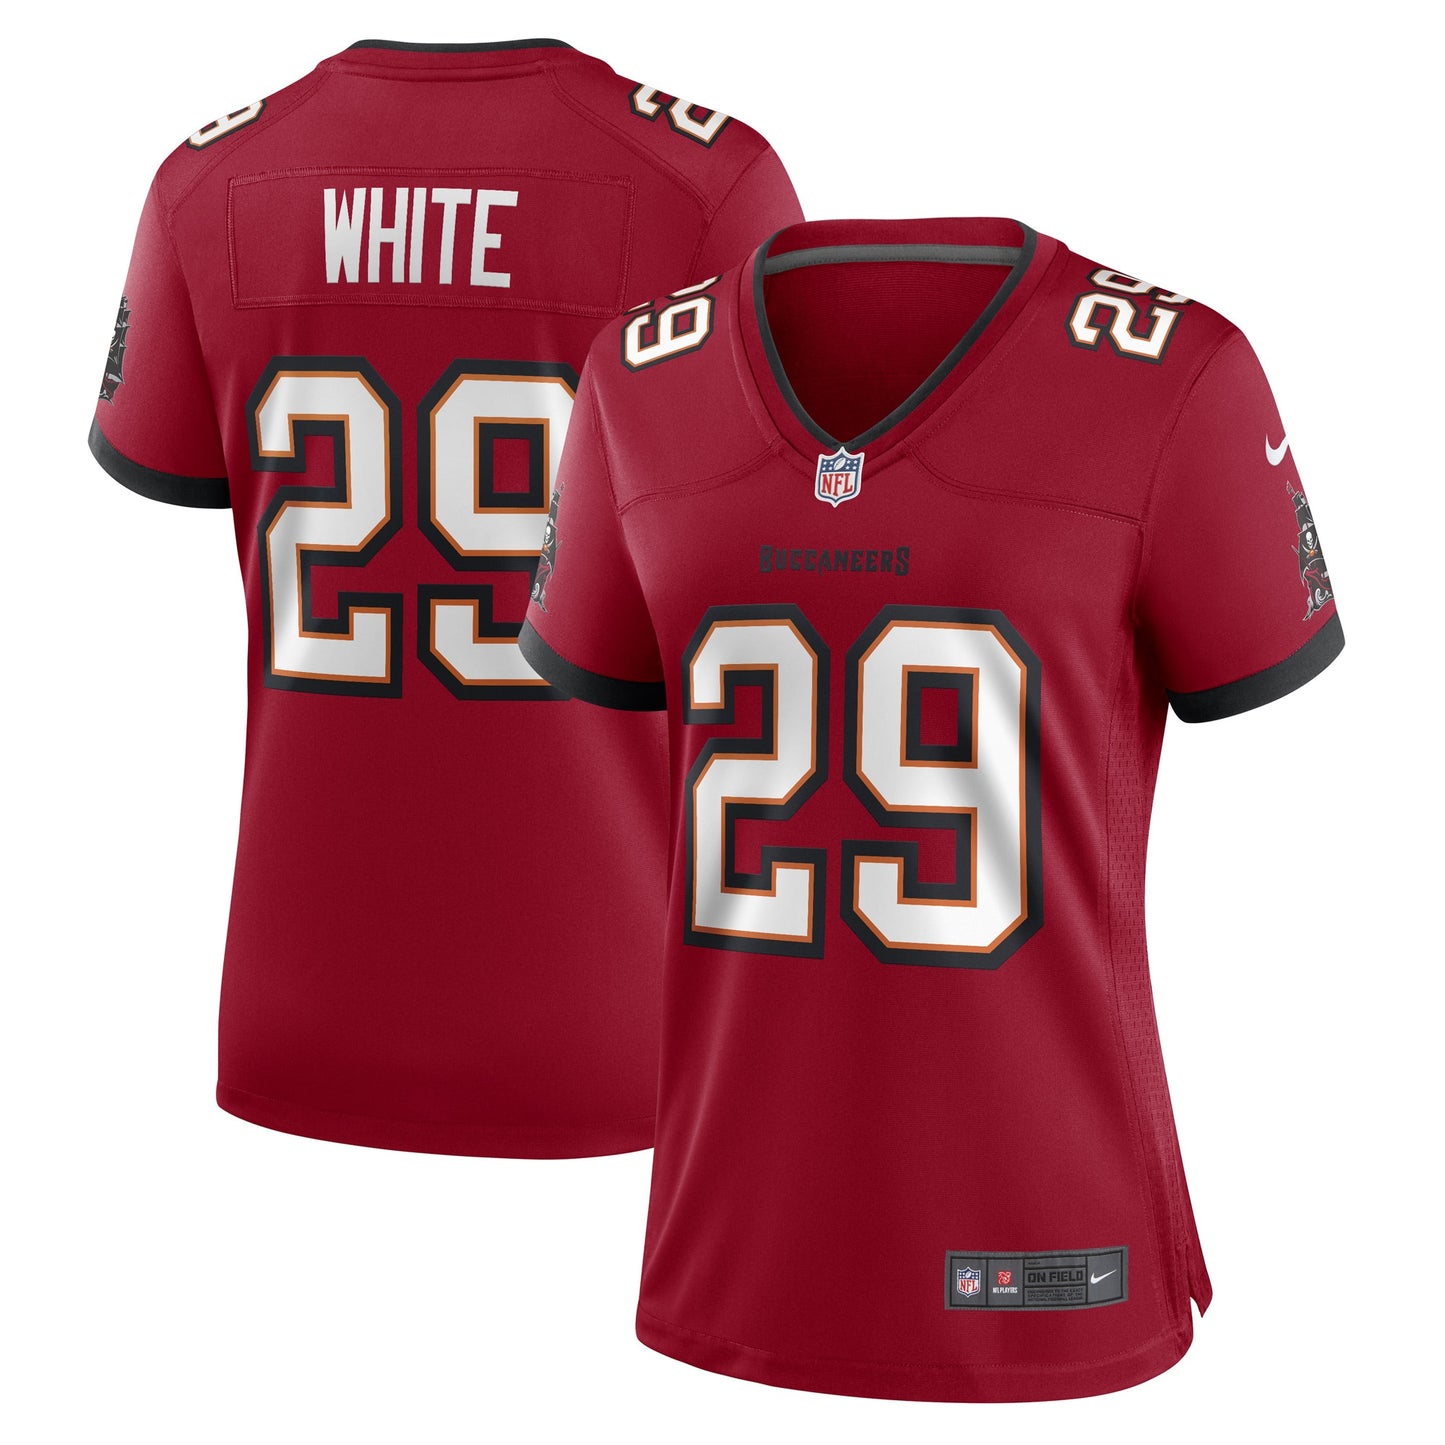 Rachaad White Tampa Bay Buccaneers Nike Women's Game Player Jersey - Red